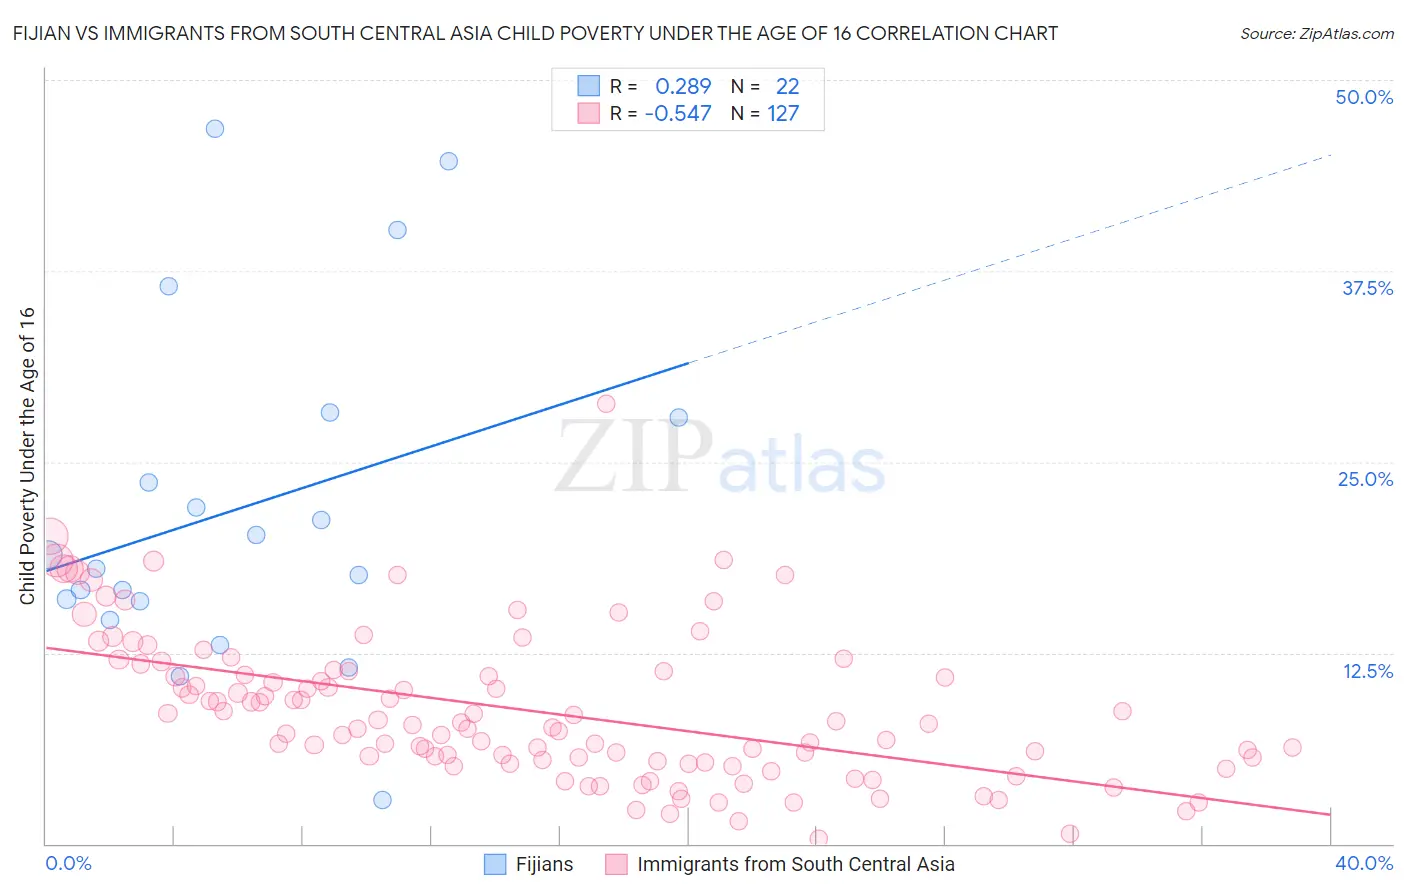 Fijian vs Immigrants from South Central Asia Child Poverty Under the Age of 16